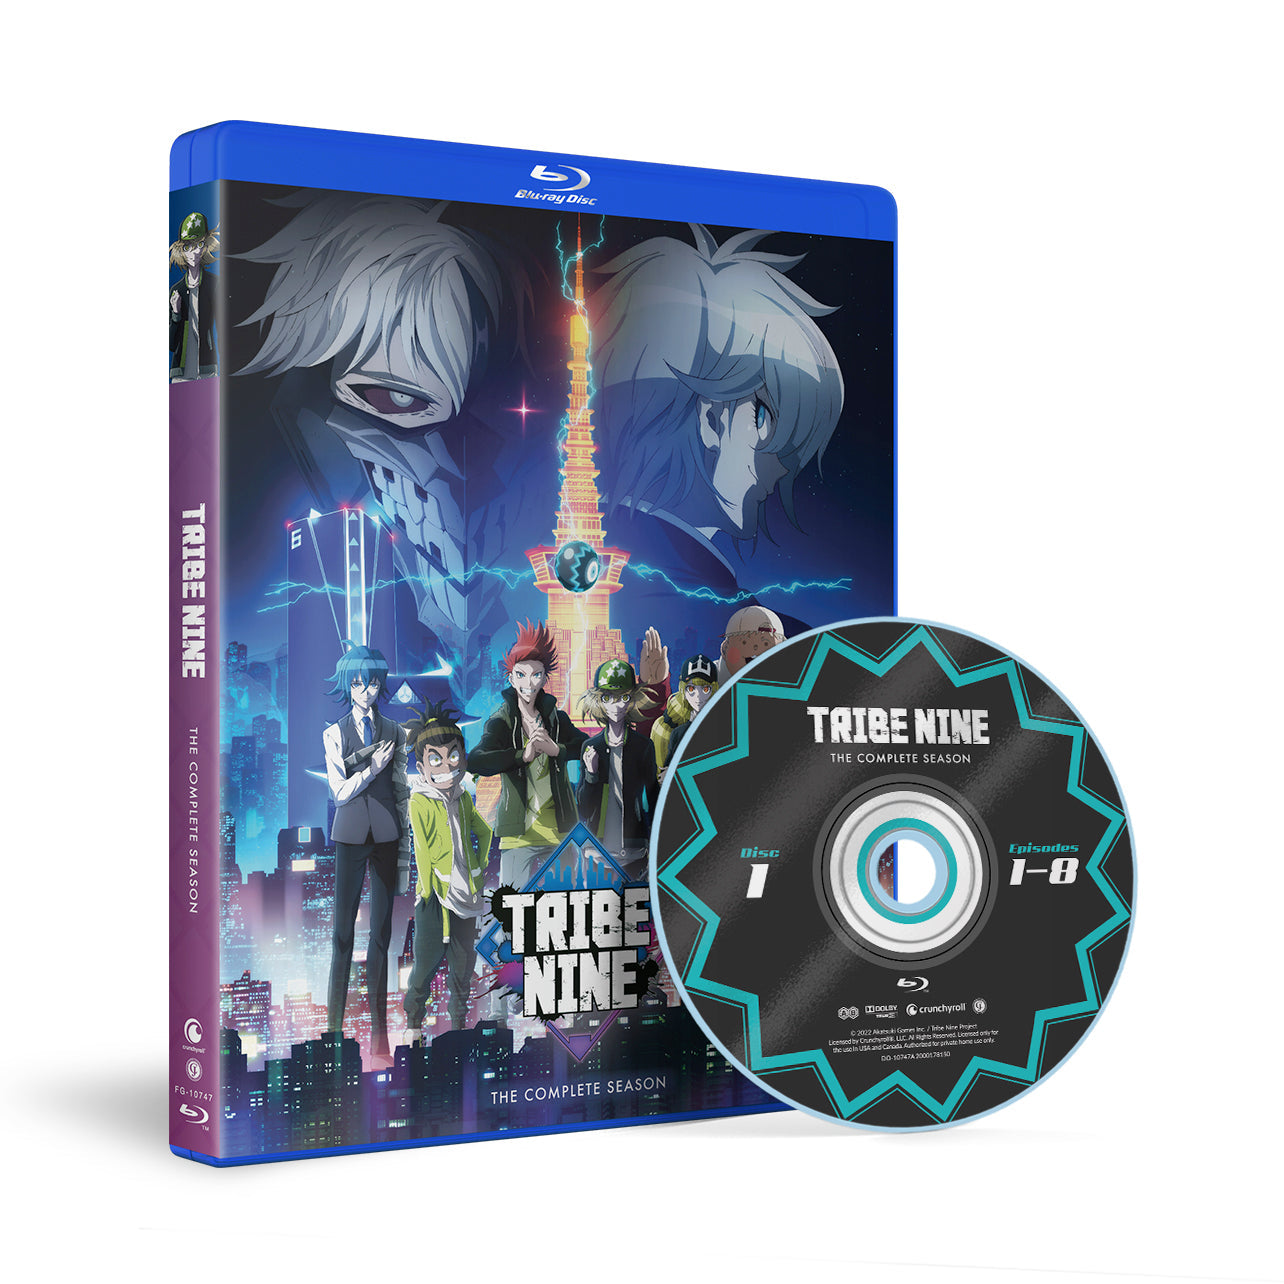 Tribe Nine - The Complete Season - Blu-ray image count 1